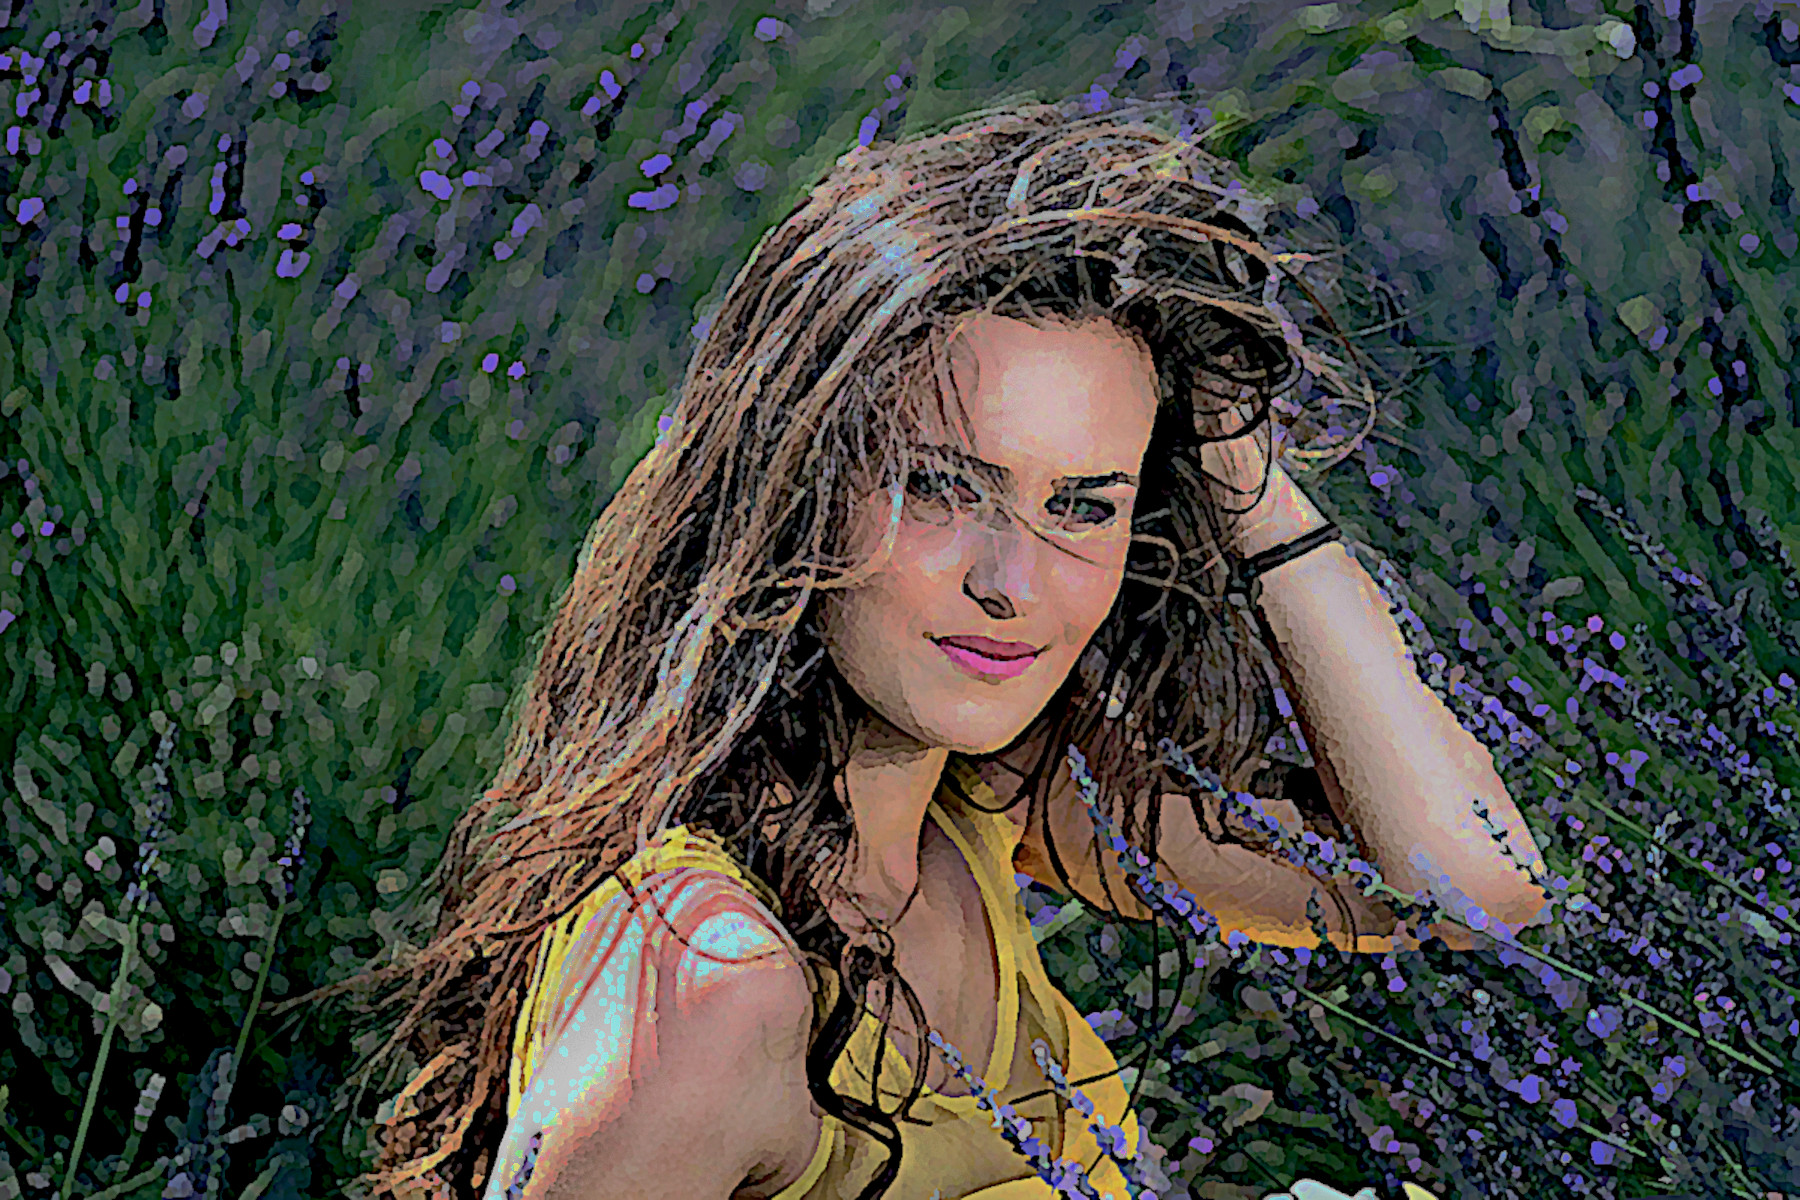 2022-02-05 06-50-42girl-lavender-flowers-mov-115008-big with a gouache painting look (effect look fine).jpeg